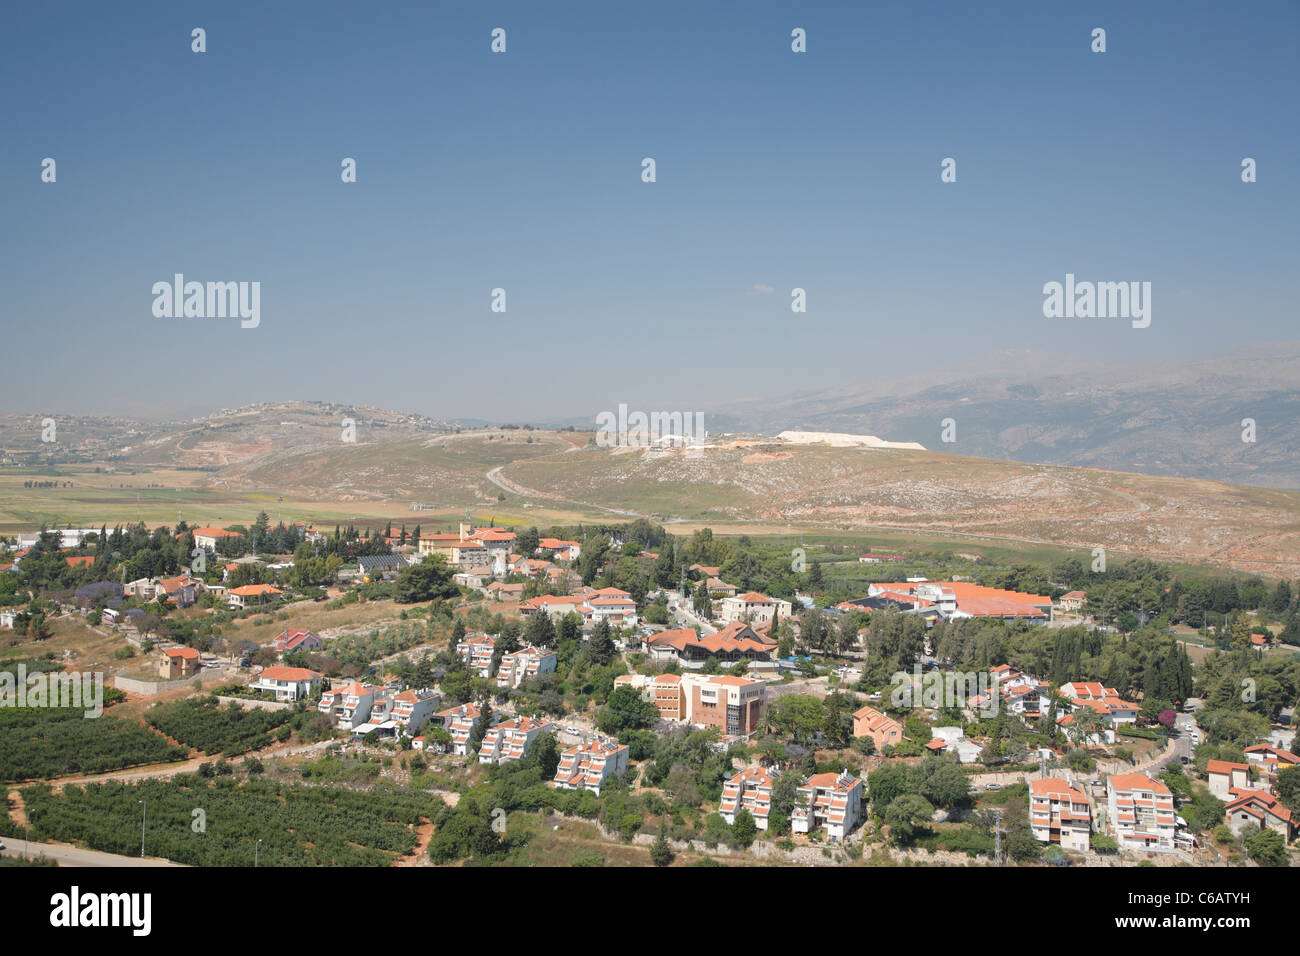 Jewish settlement, View from Golan Heights, Israel Stock Photo